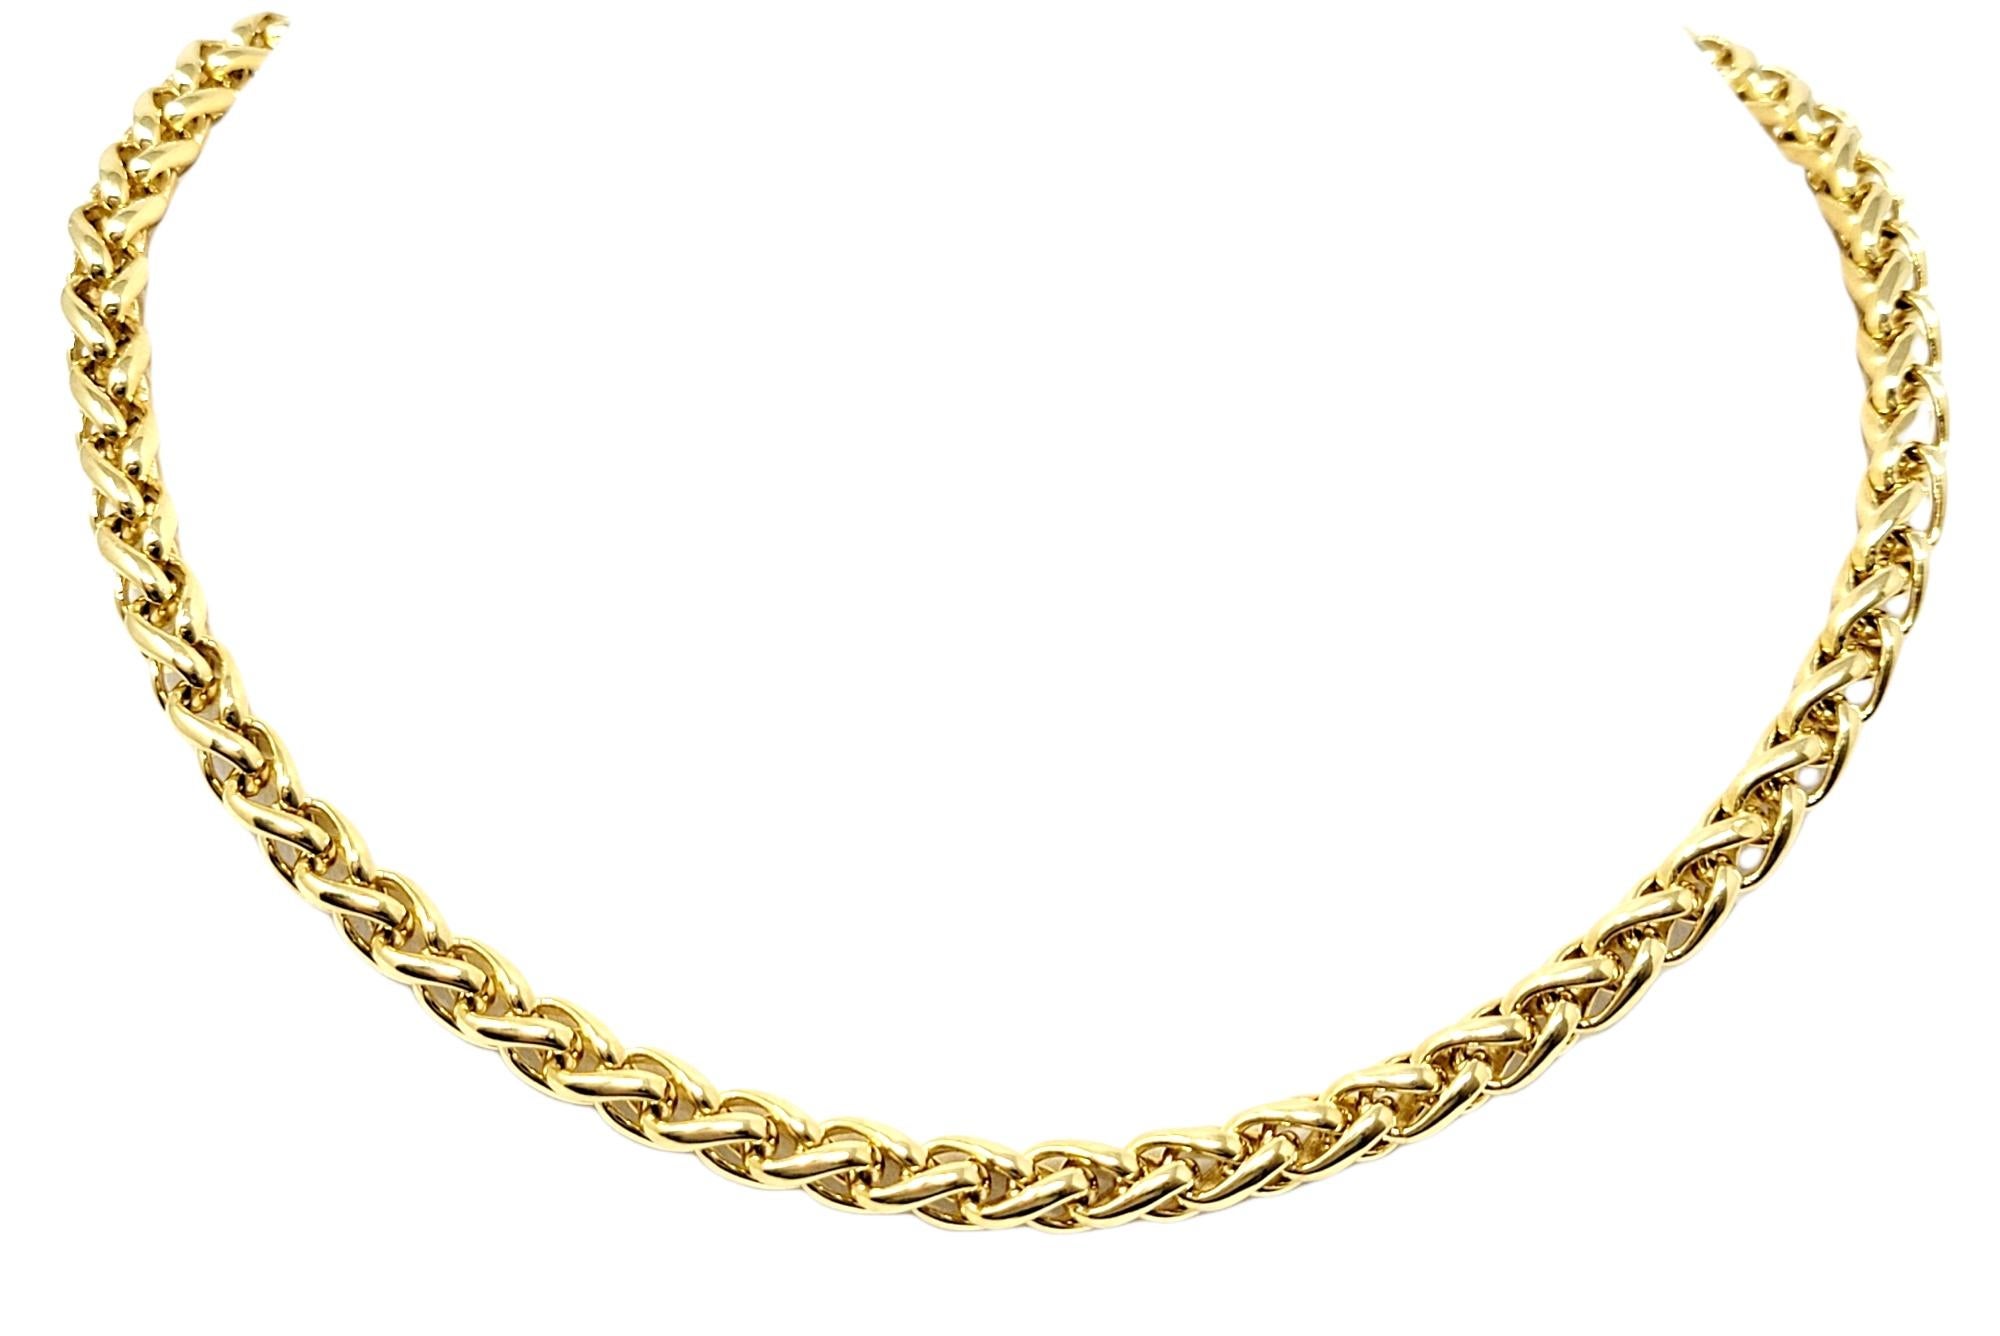 Simple yet elegant 18 karat yellow gold wheat chain necklace by designer David Yurman. This versatile piece can be dressed up or down and worn with just about everything. The flexible design gently hugs the neck, while the delicate diamond detailing